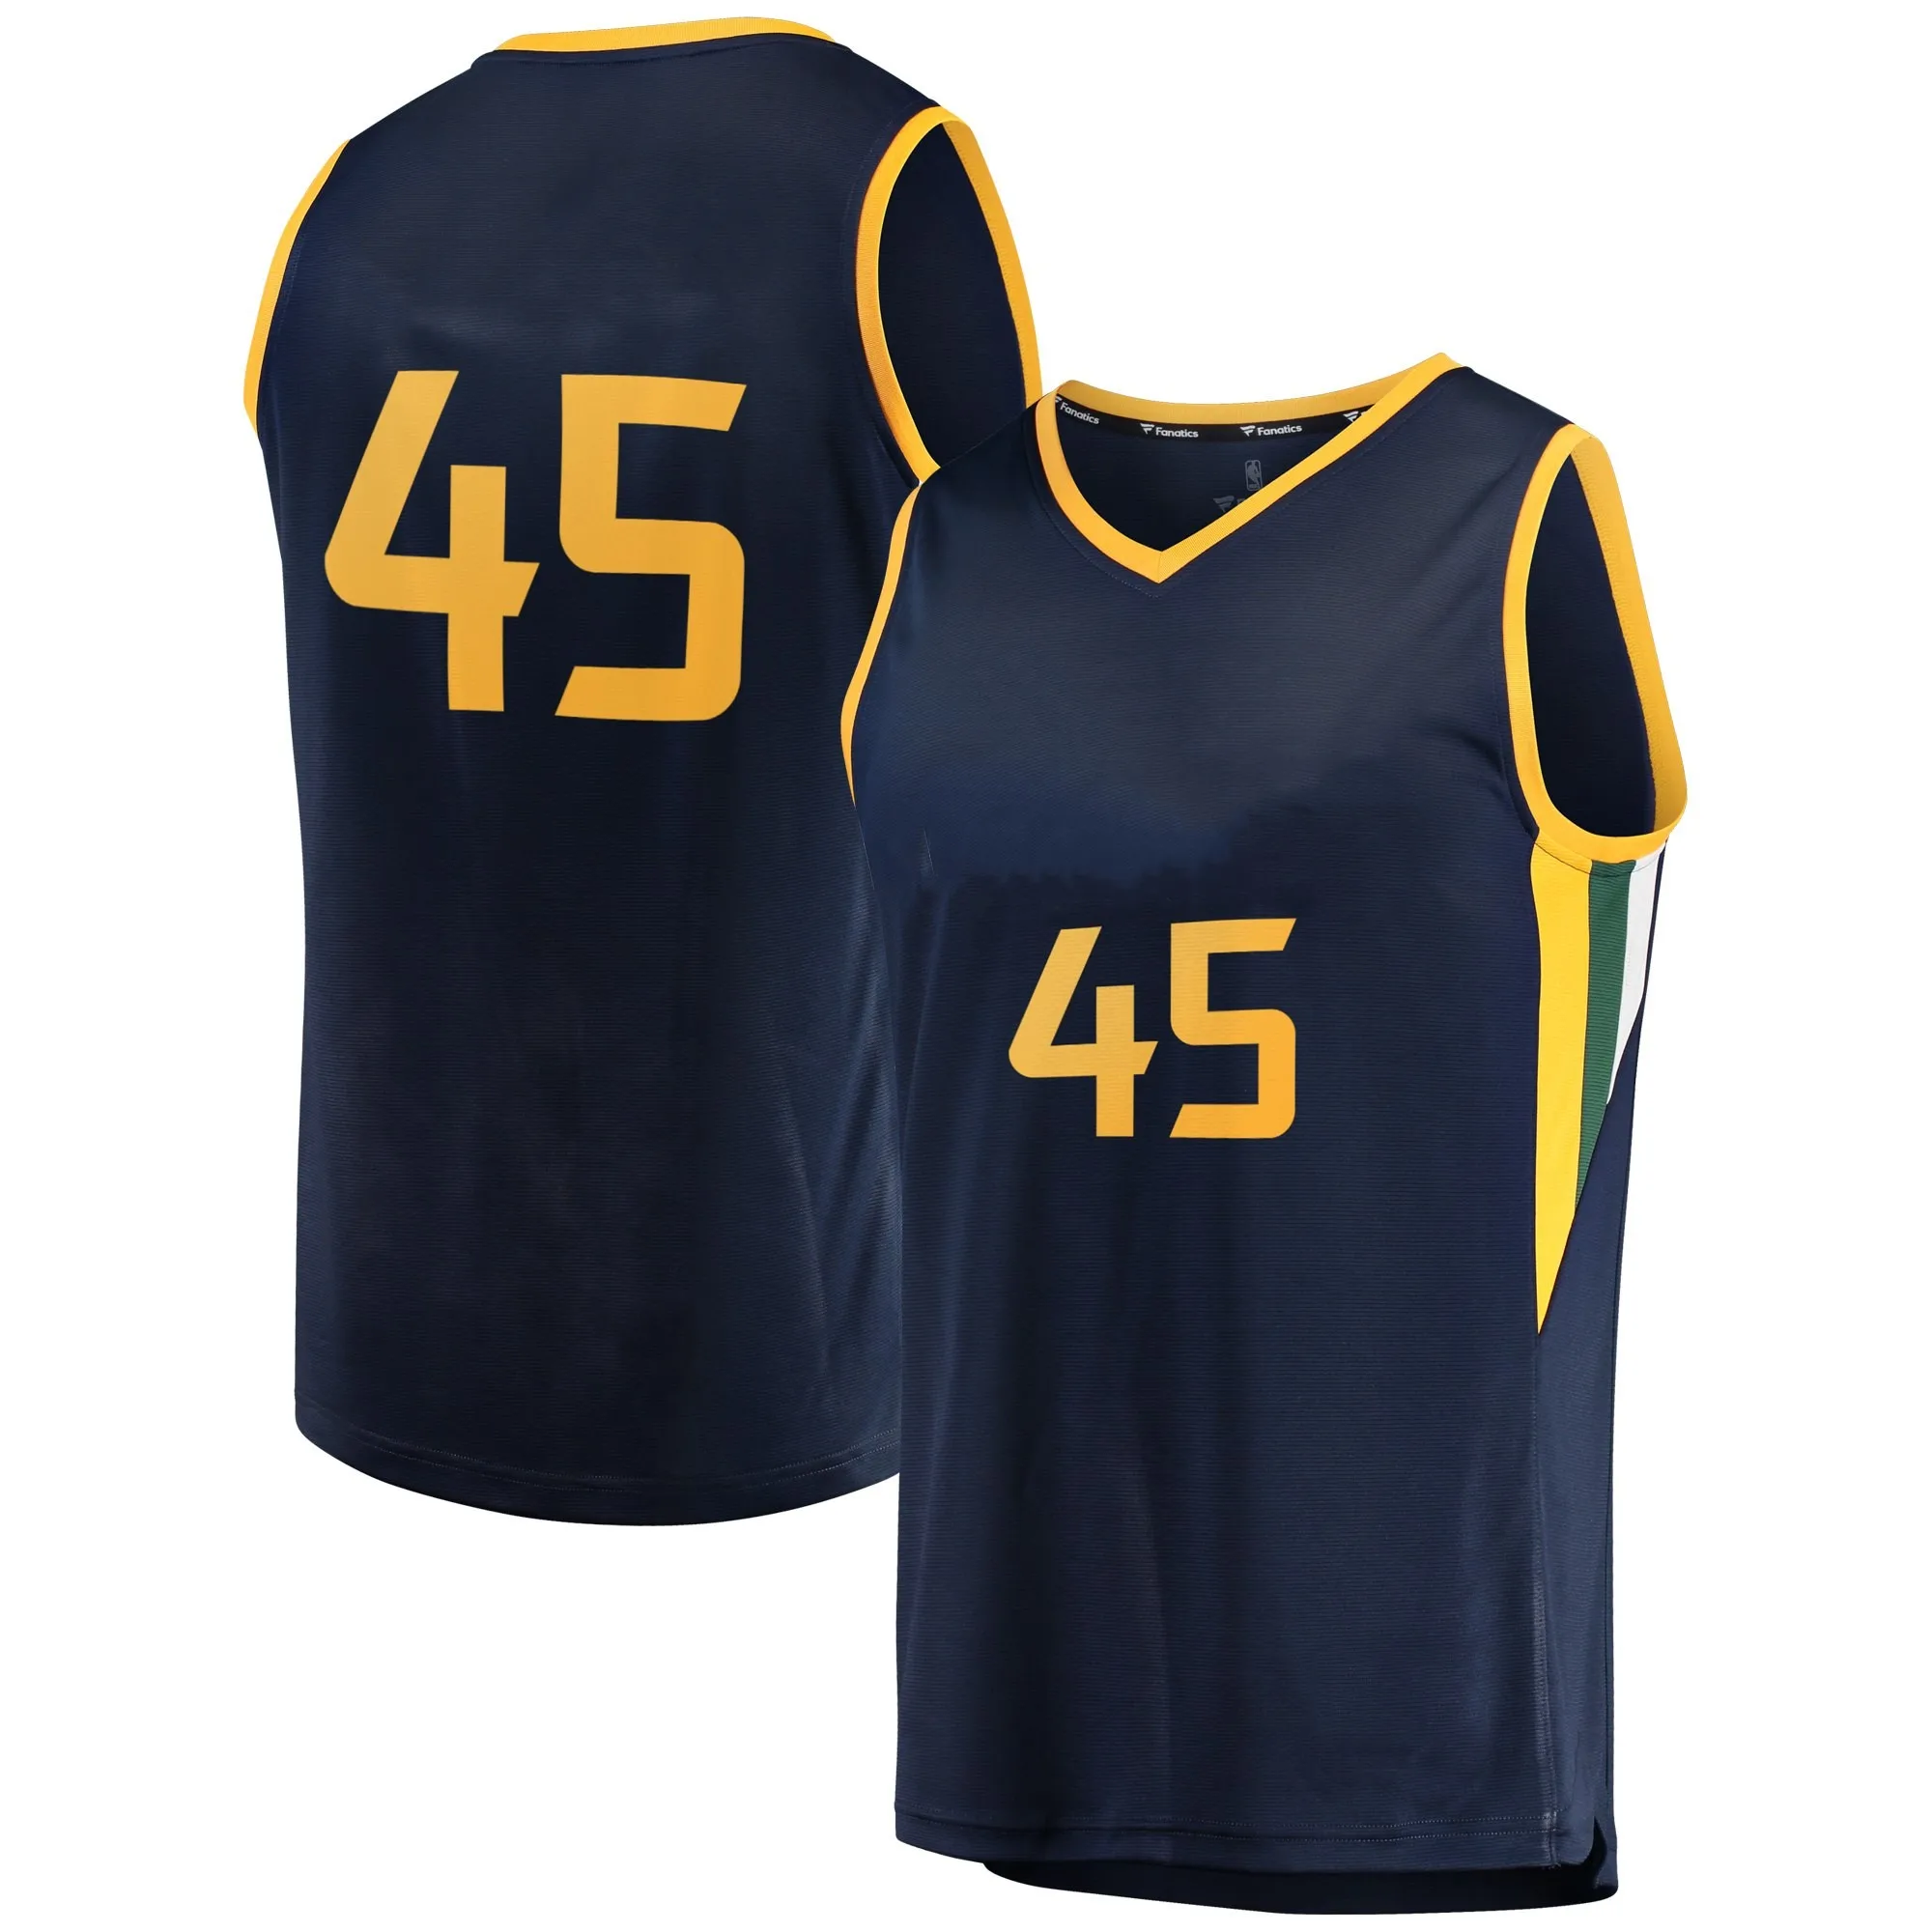 Customize Design Bright Color Reversible Basketball Wear Unisex Basketball  Jersey - China Basketball Team Uniforms Sets and Team Basketball Uniform  price